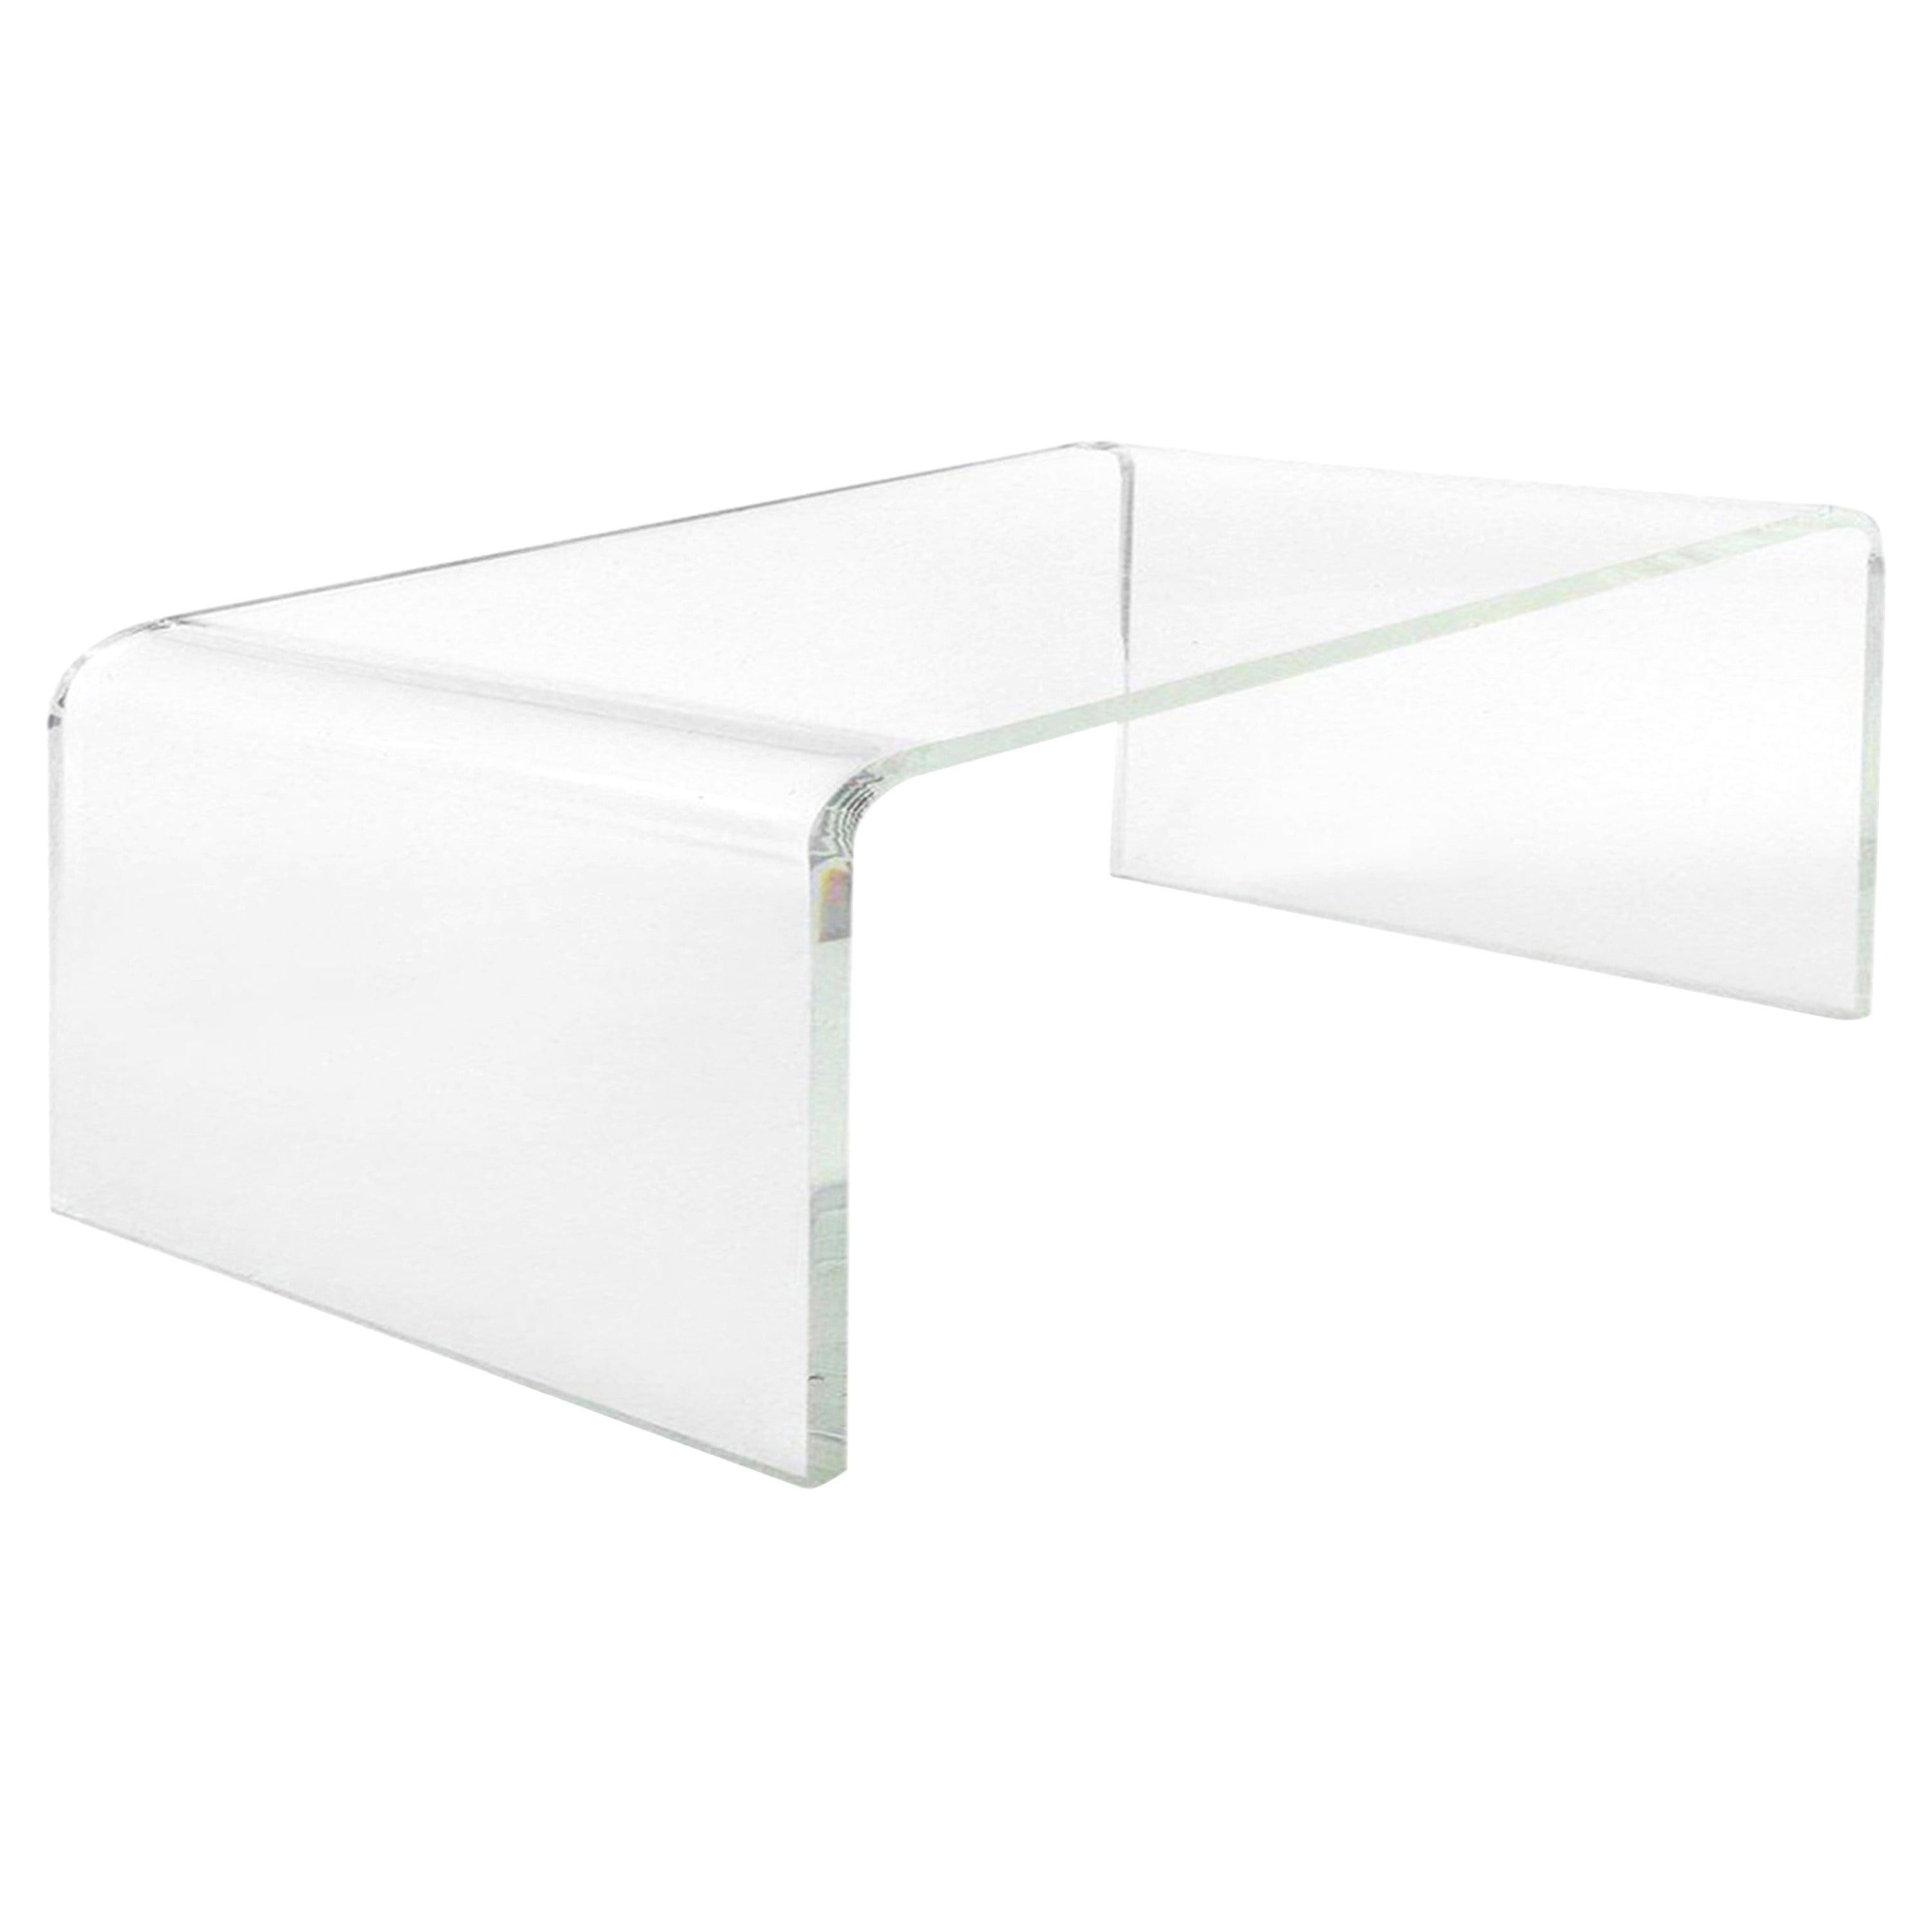 Custom Lucite Waterfall Table or Bench with Curved Sides For Sale